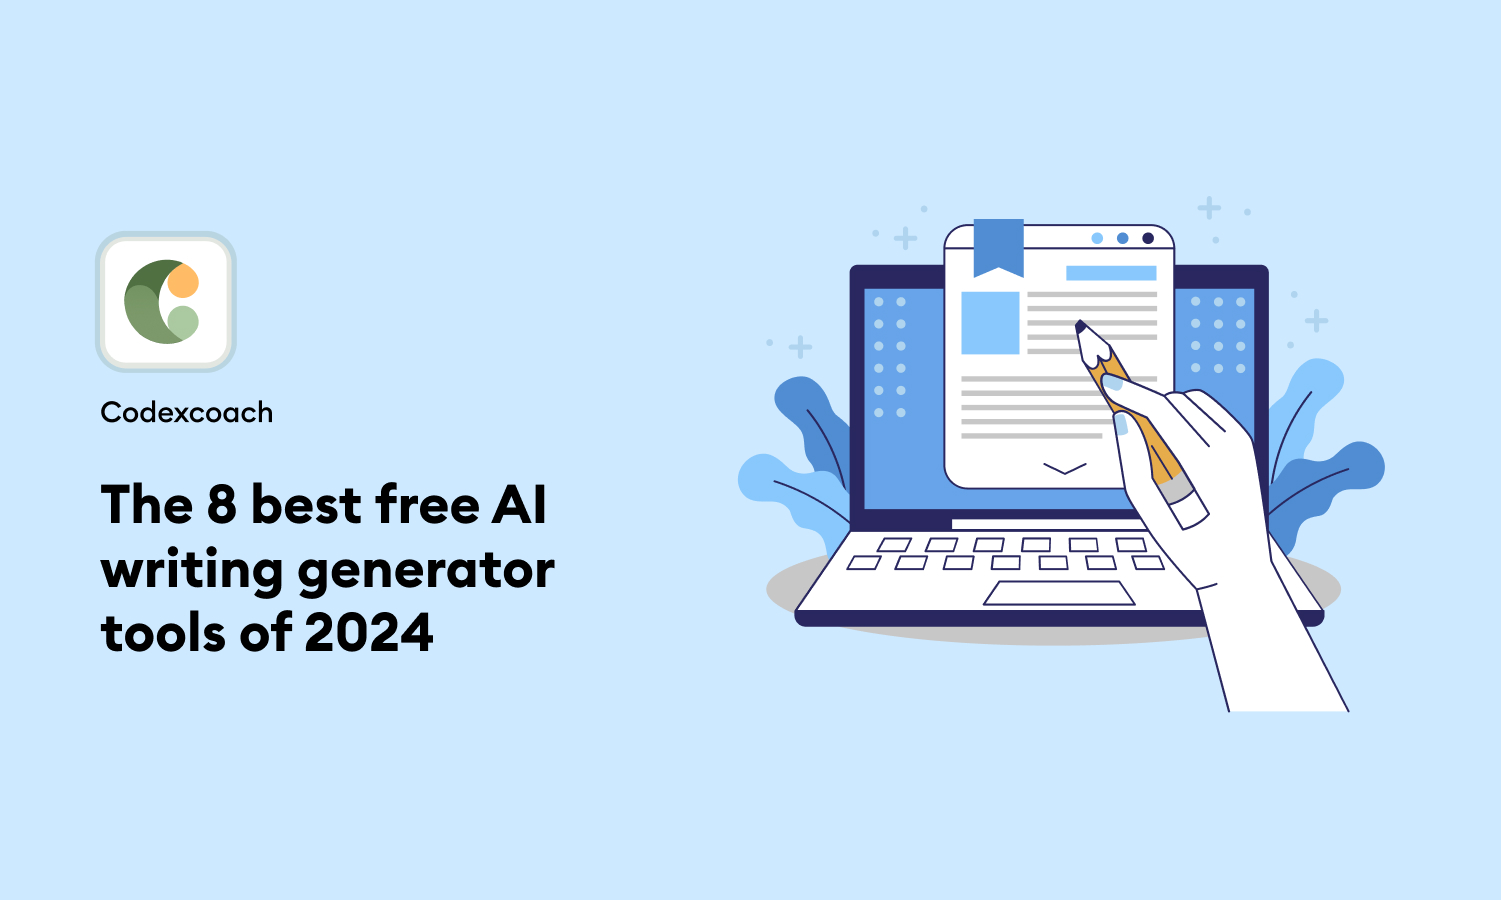 The 8 best free AI writing generator tools of 2024